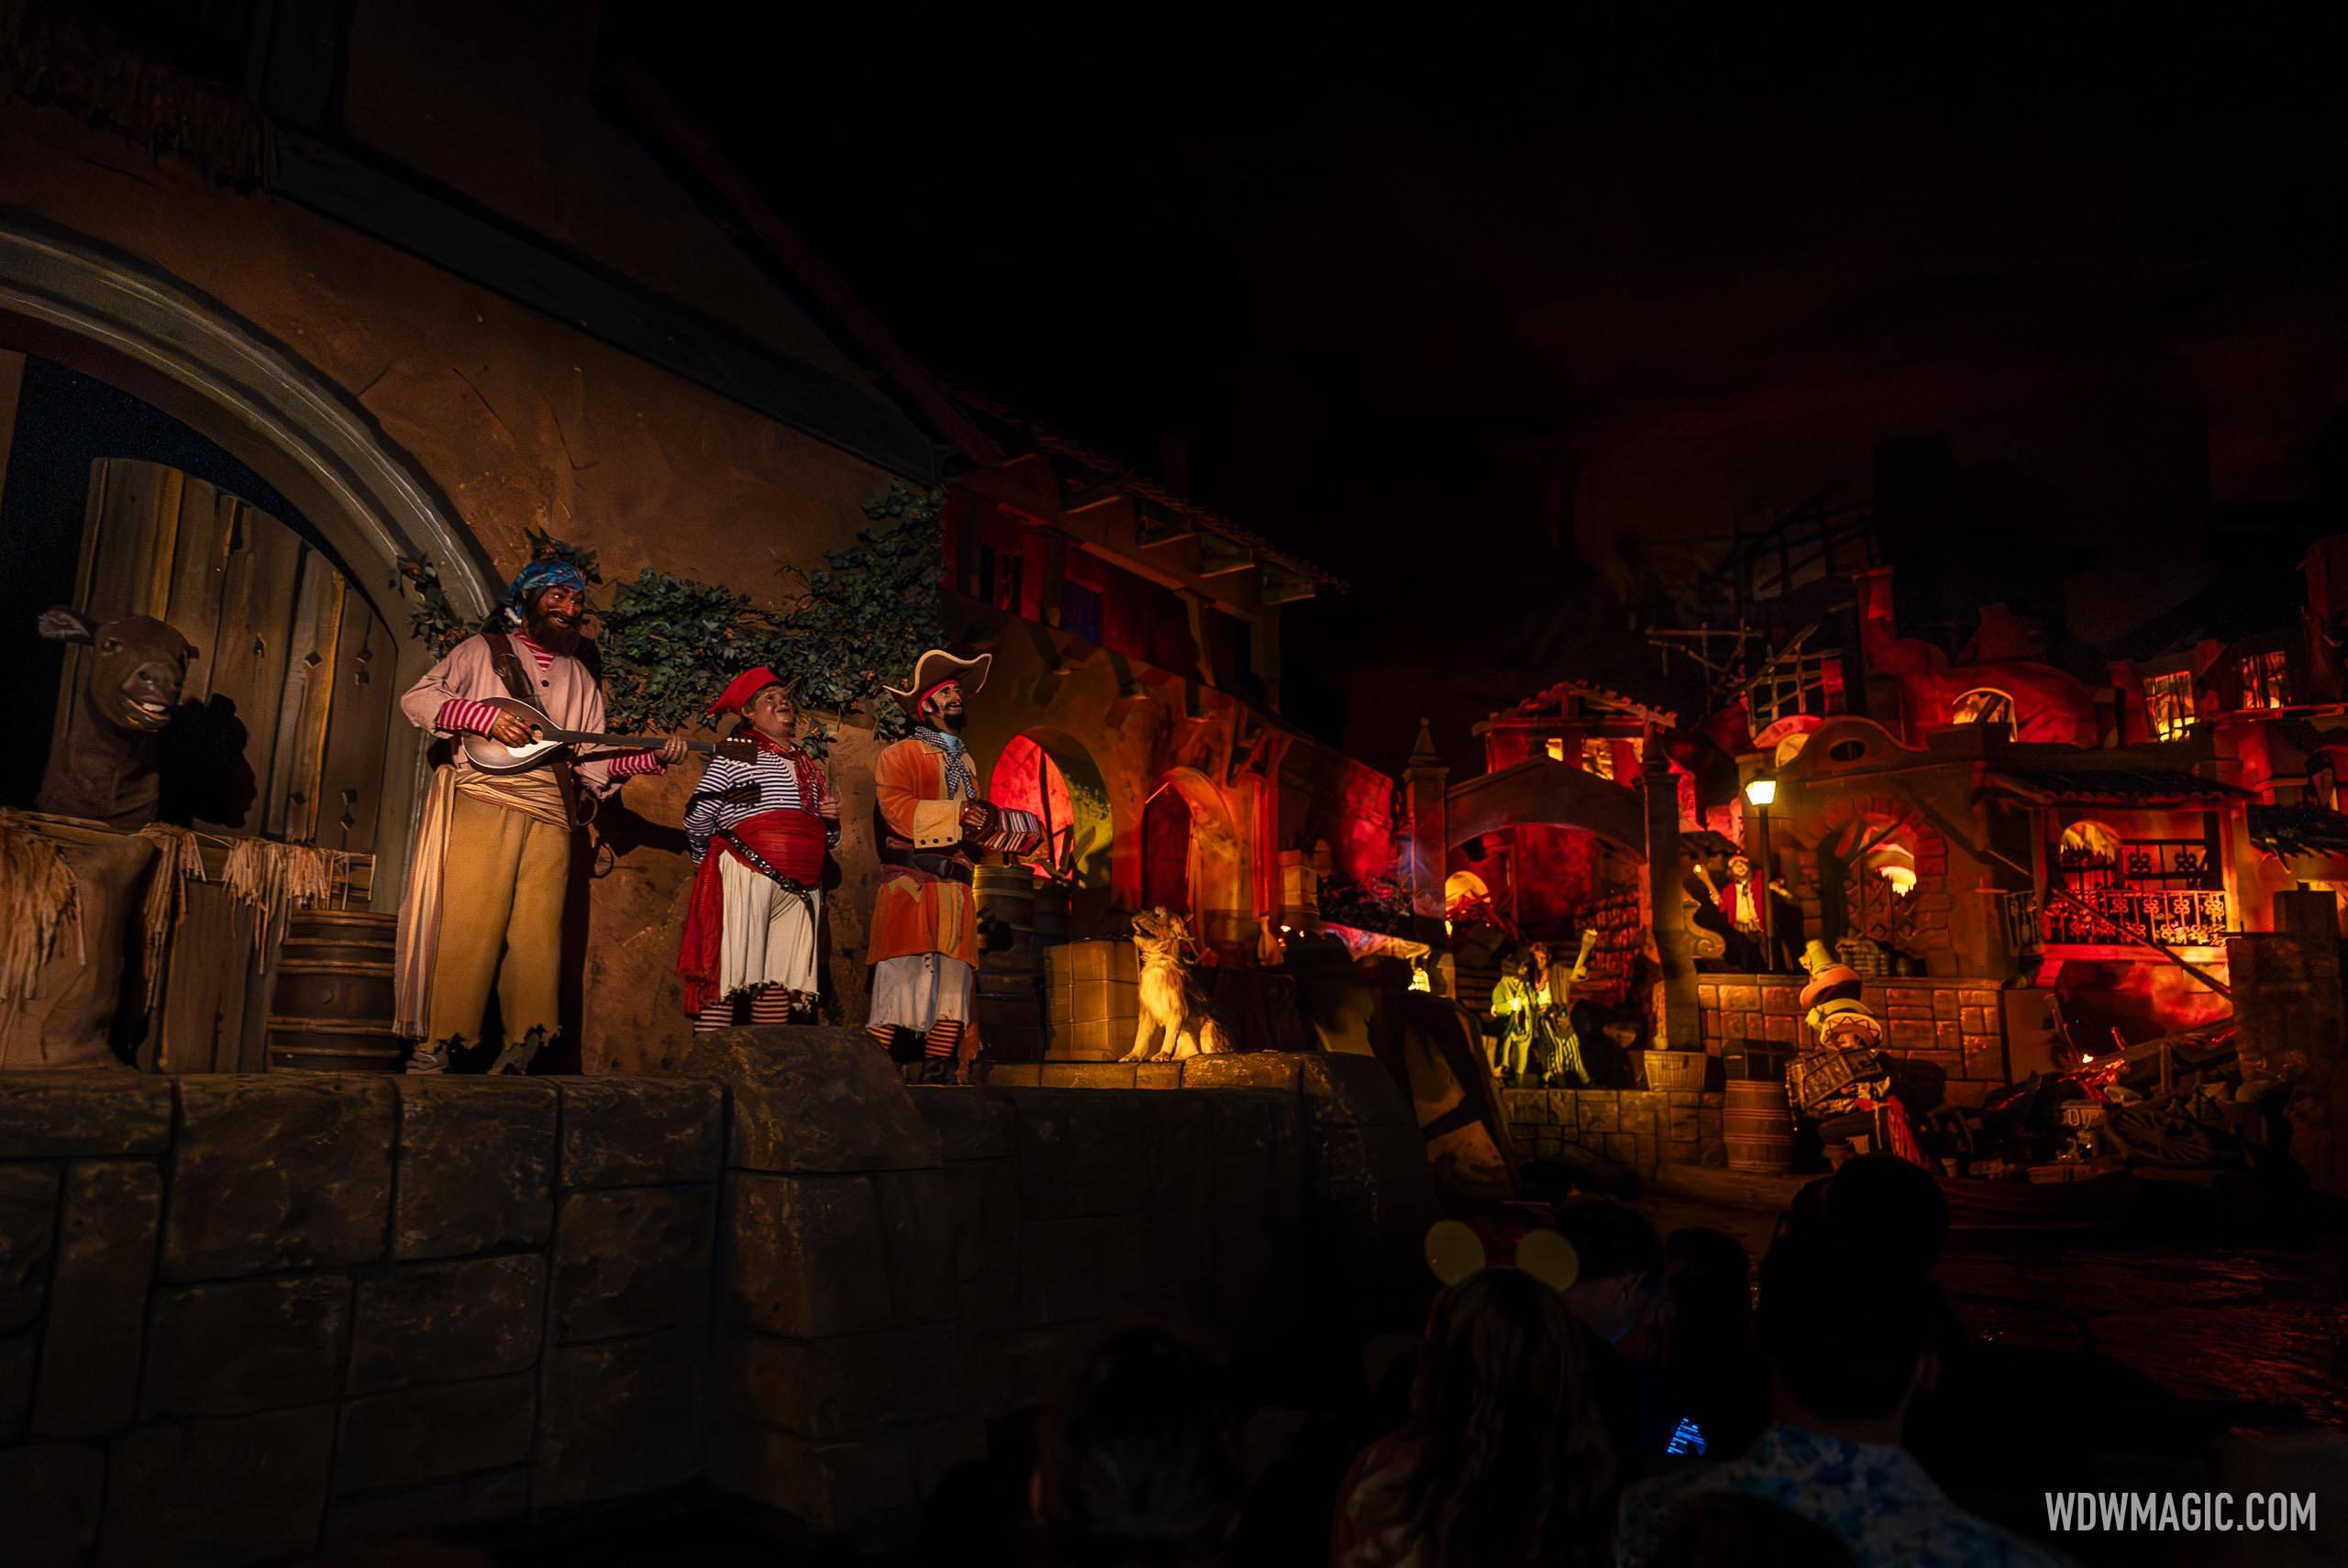 Pirates of the Caribbean closing for refurbishment in February for new auction scene